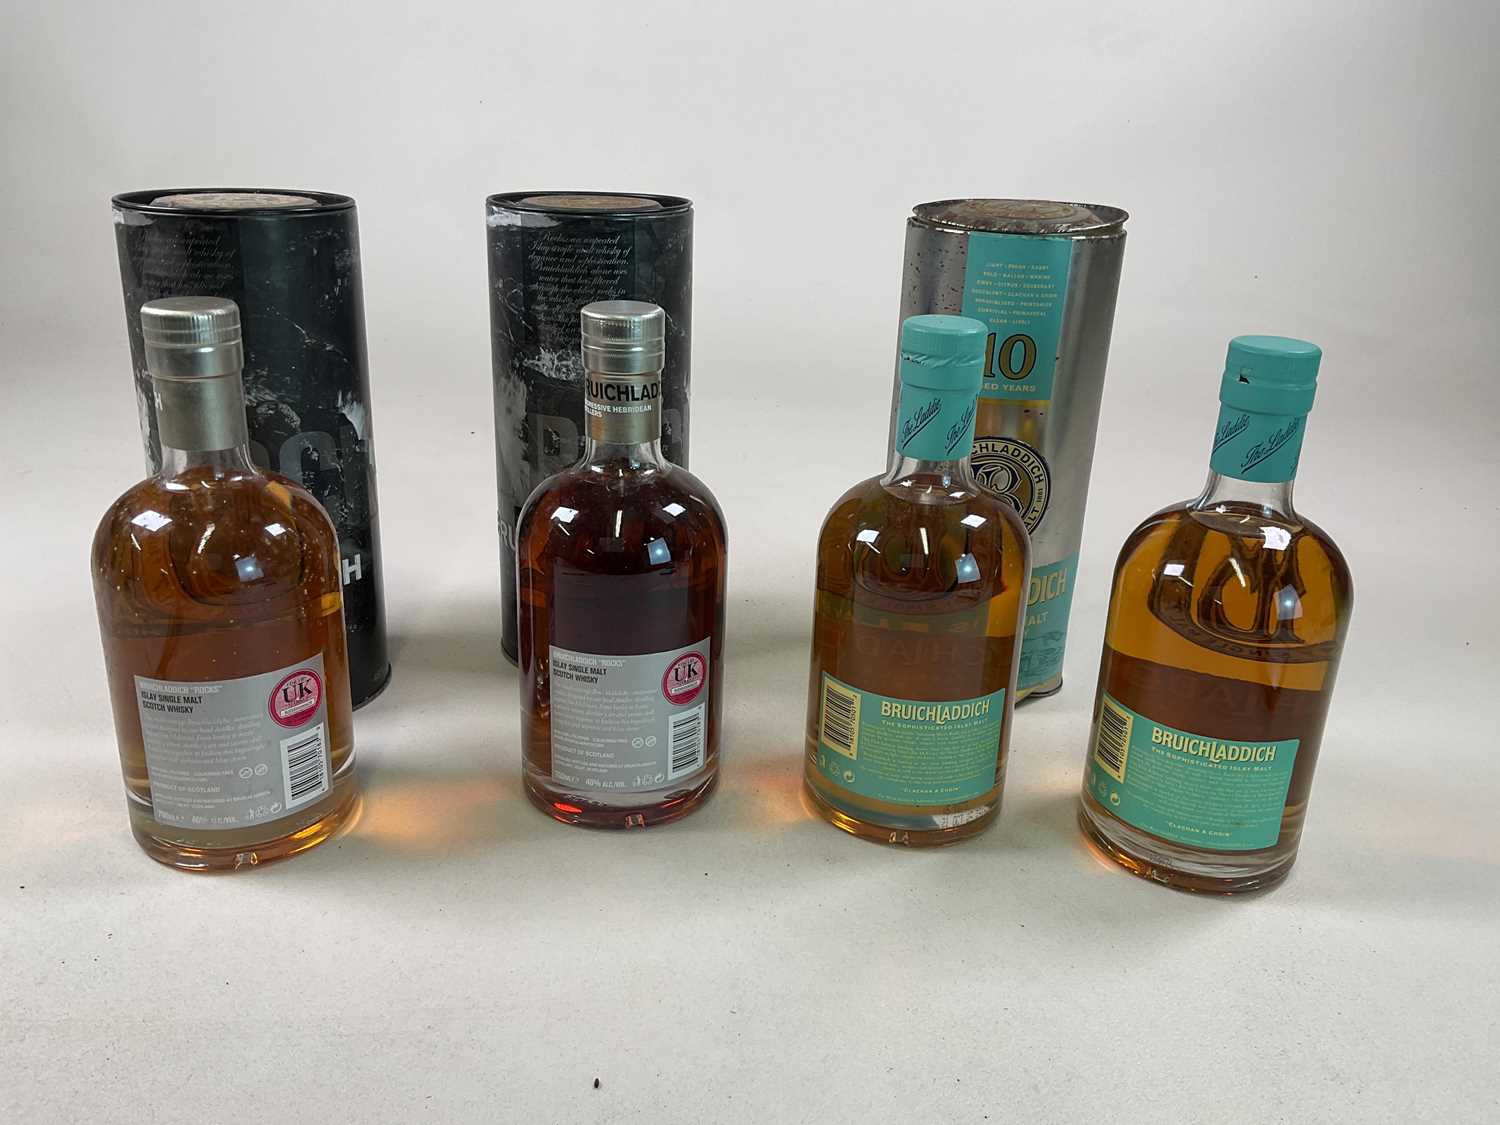 WHISKY; four bottles of Bruichladdich, two of Islay Single Malt Scotch whisky, aged 10 years, 46%, - Image 2 of 2